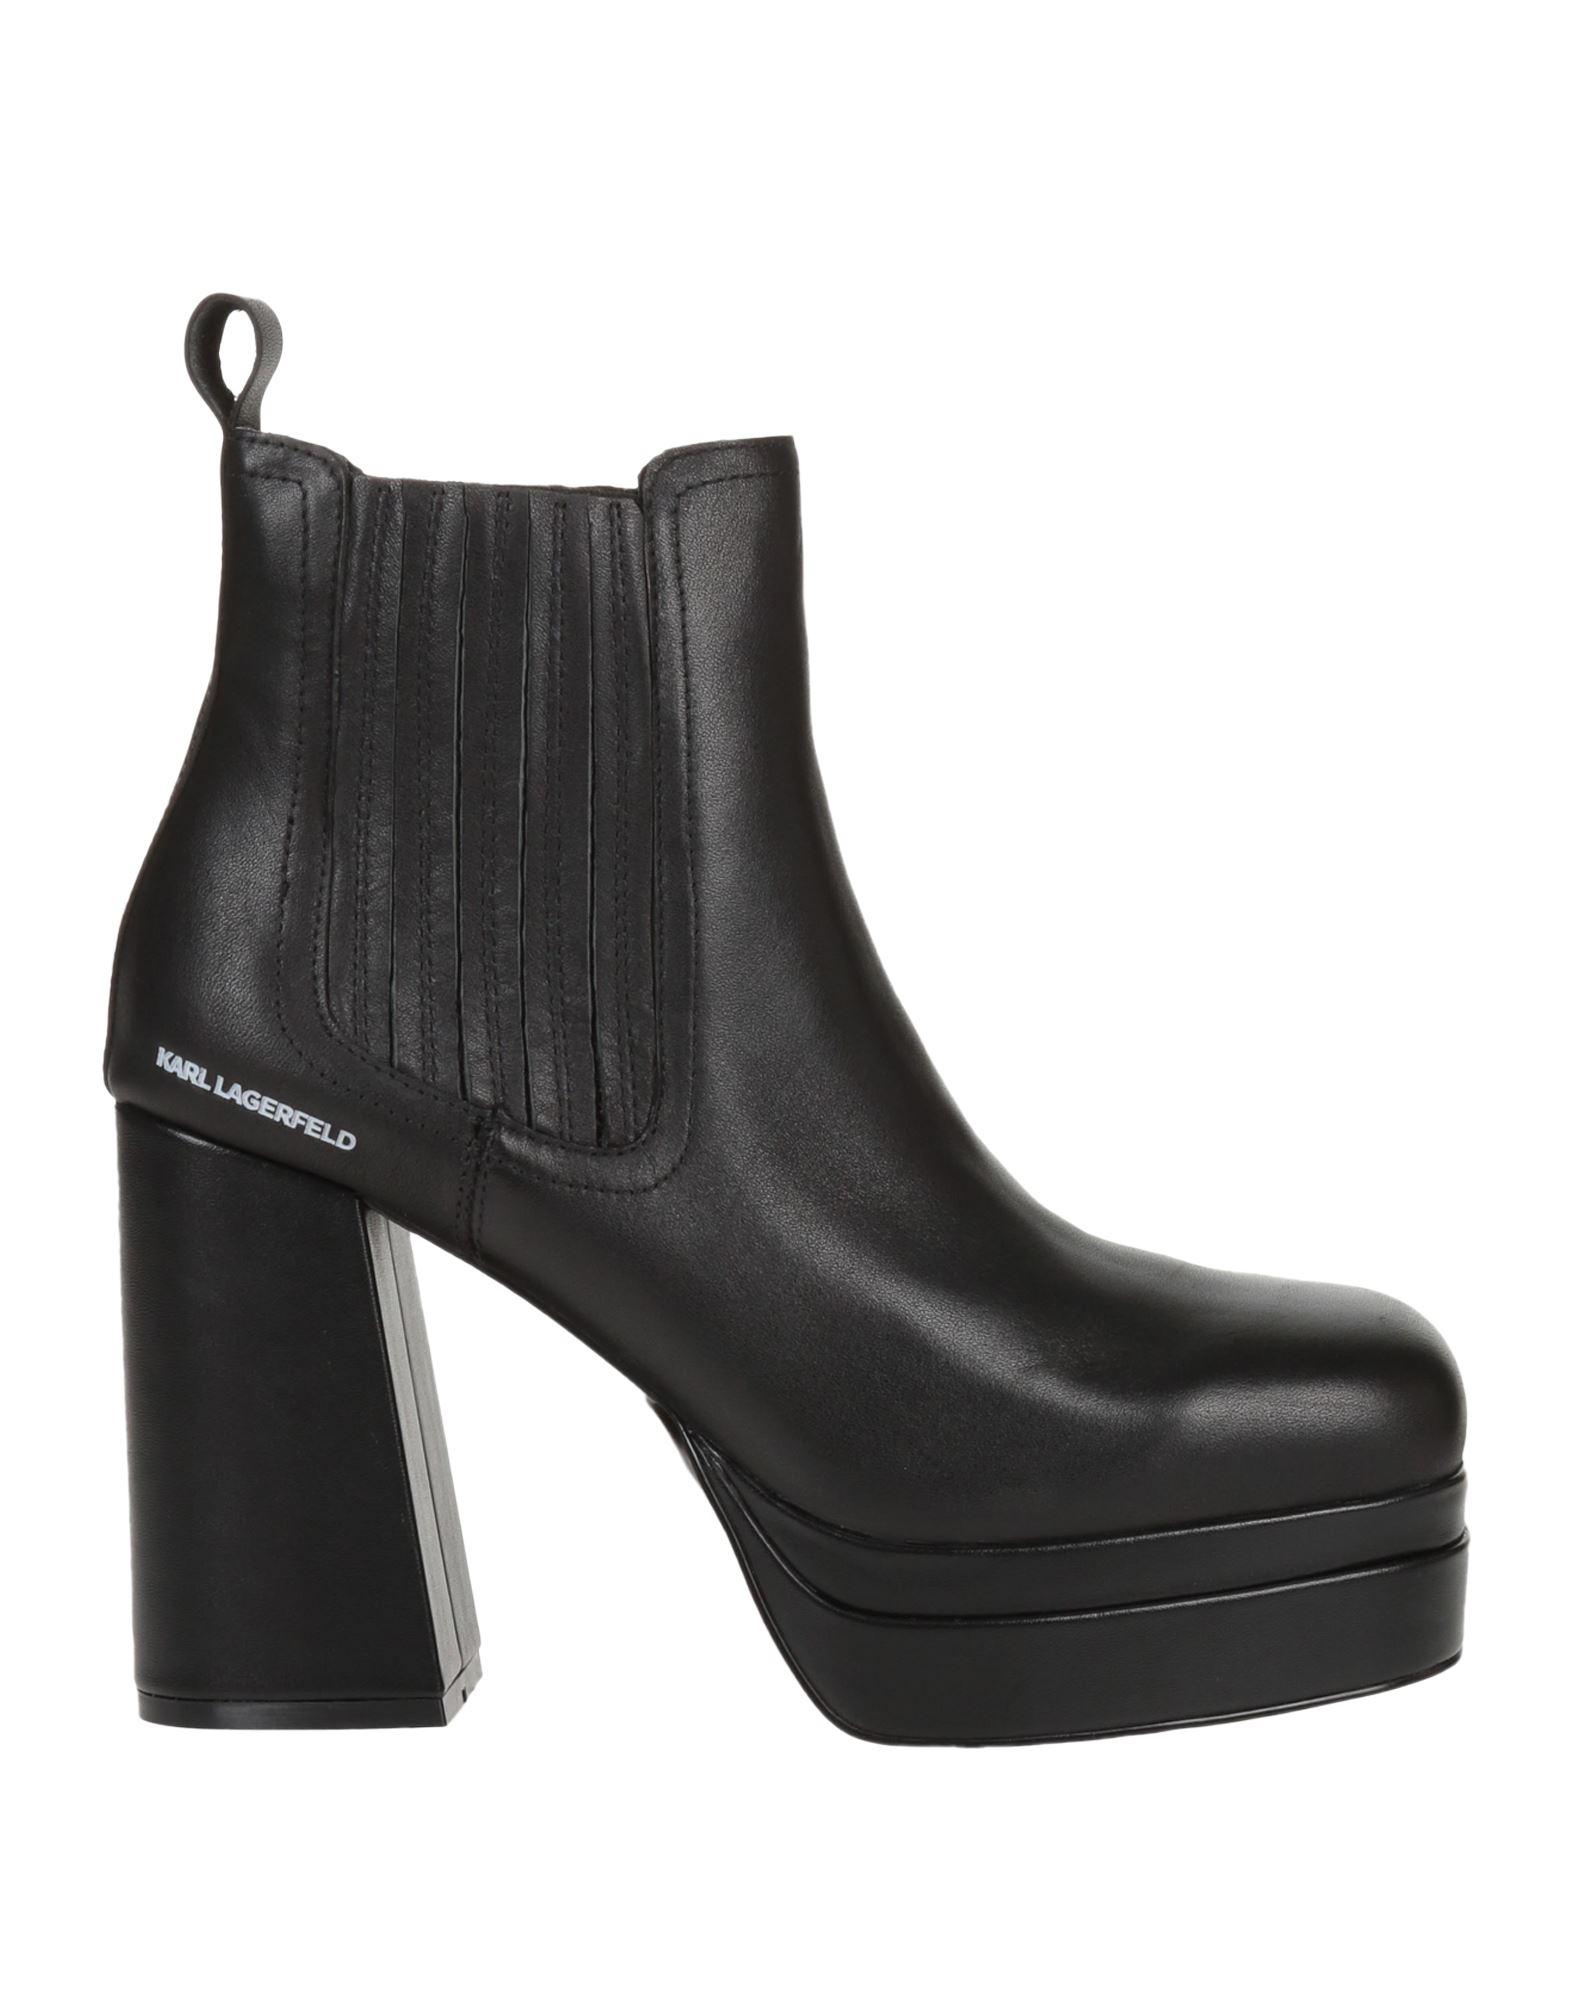 Karl Lagerfeld Ankle Boots in Black | Lyst